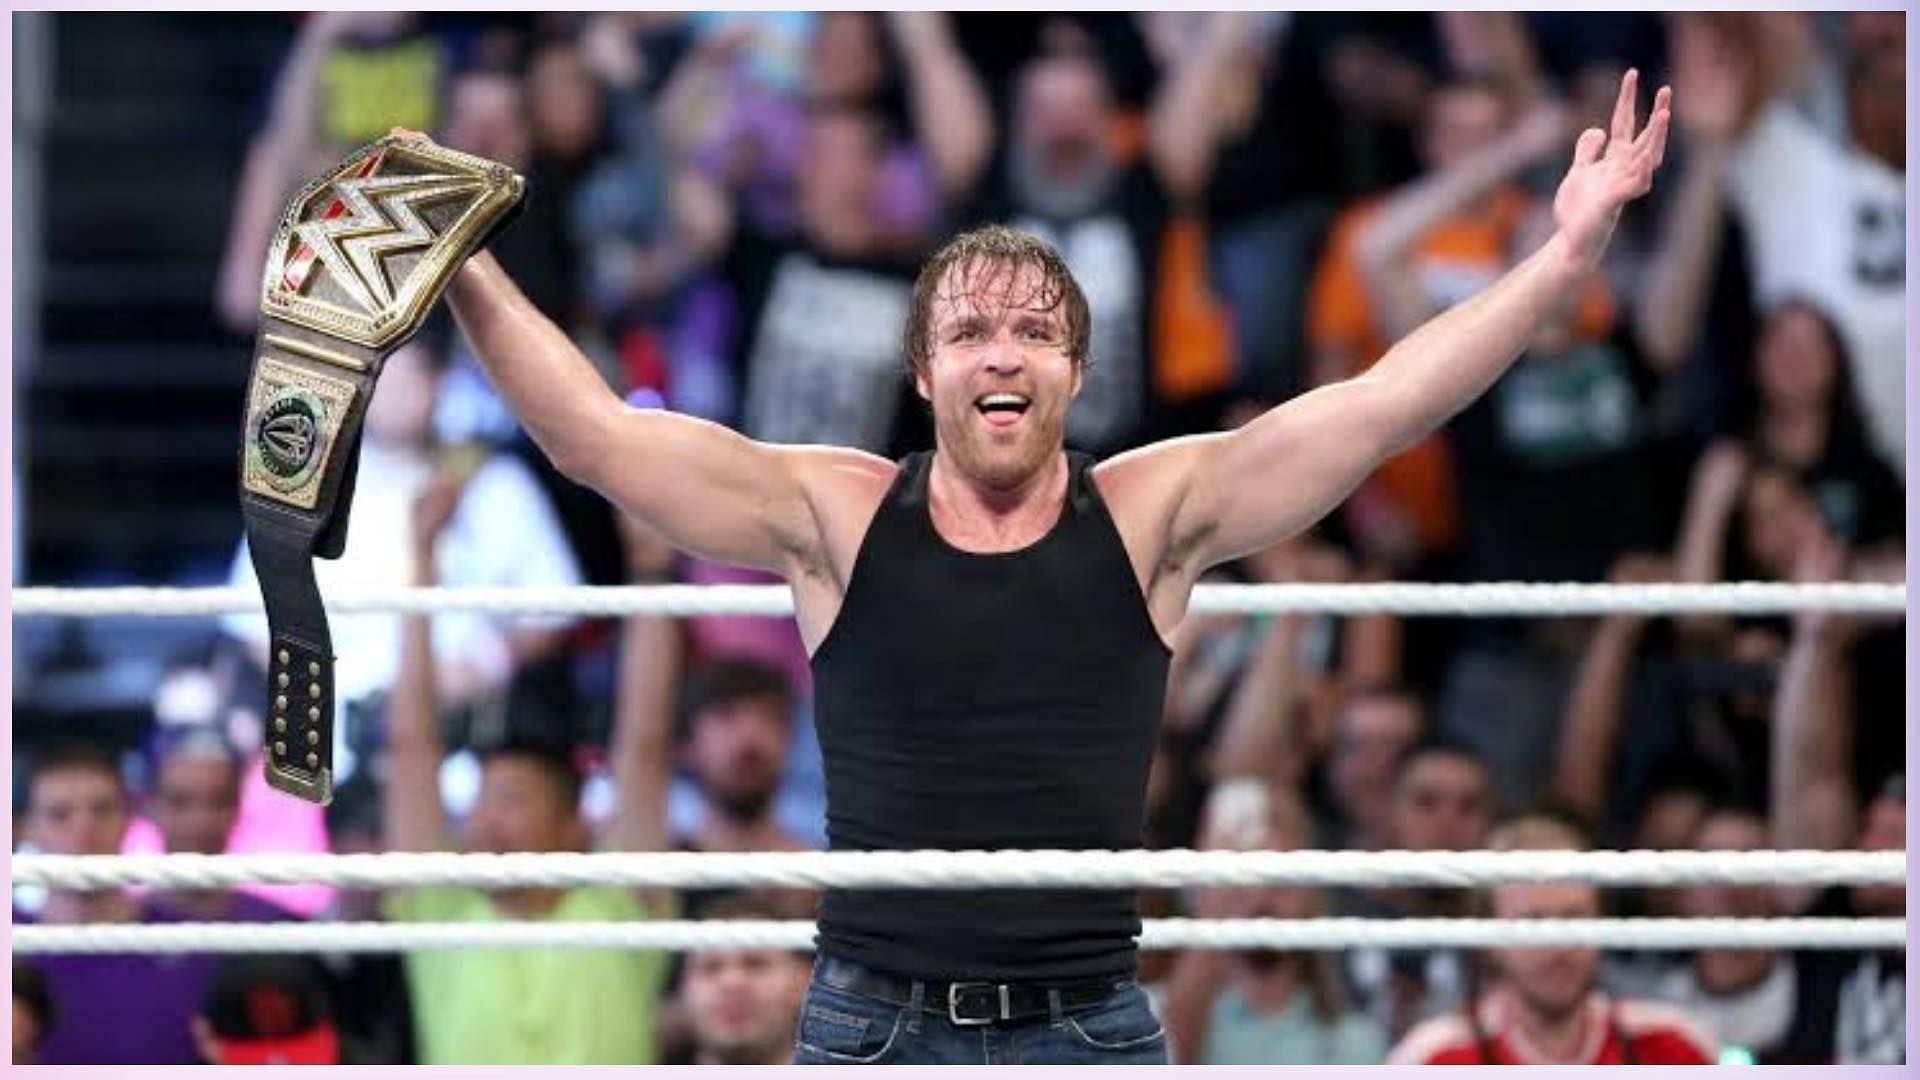 Jon Moxley is a former AEW World Champion